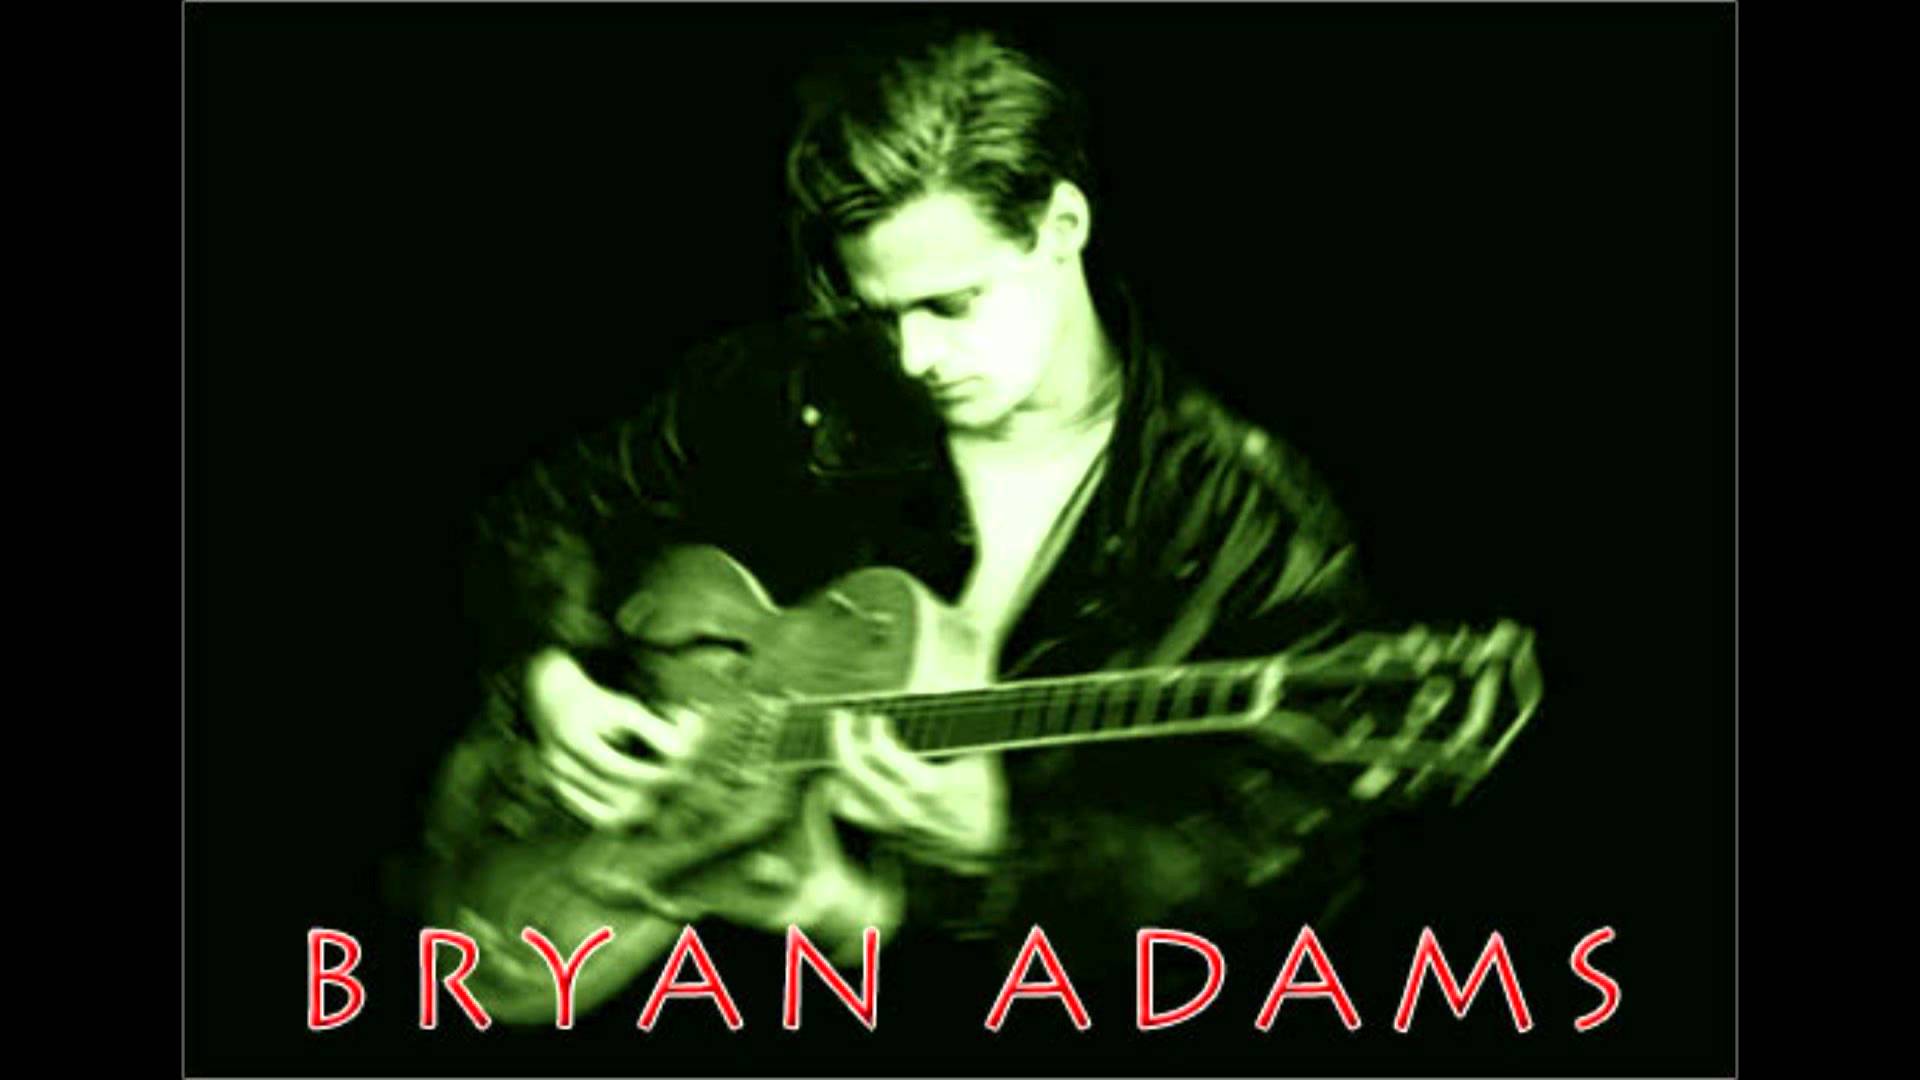 Bryan Adams Summer of 69 Backing track for Guitar Cover